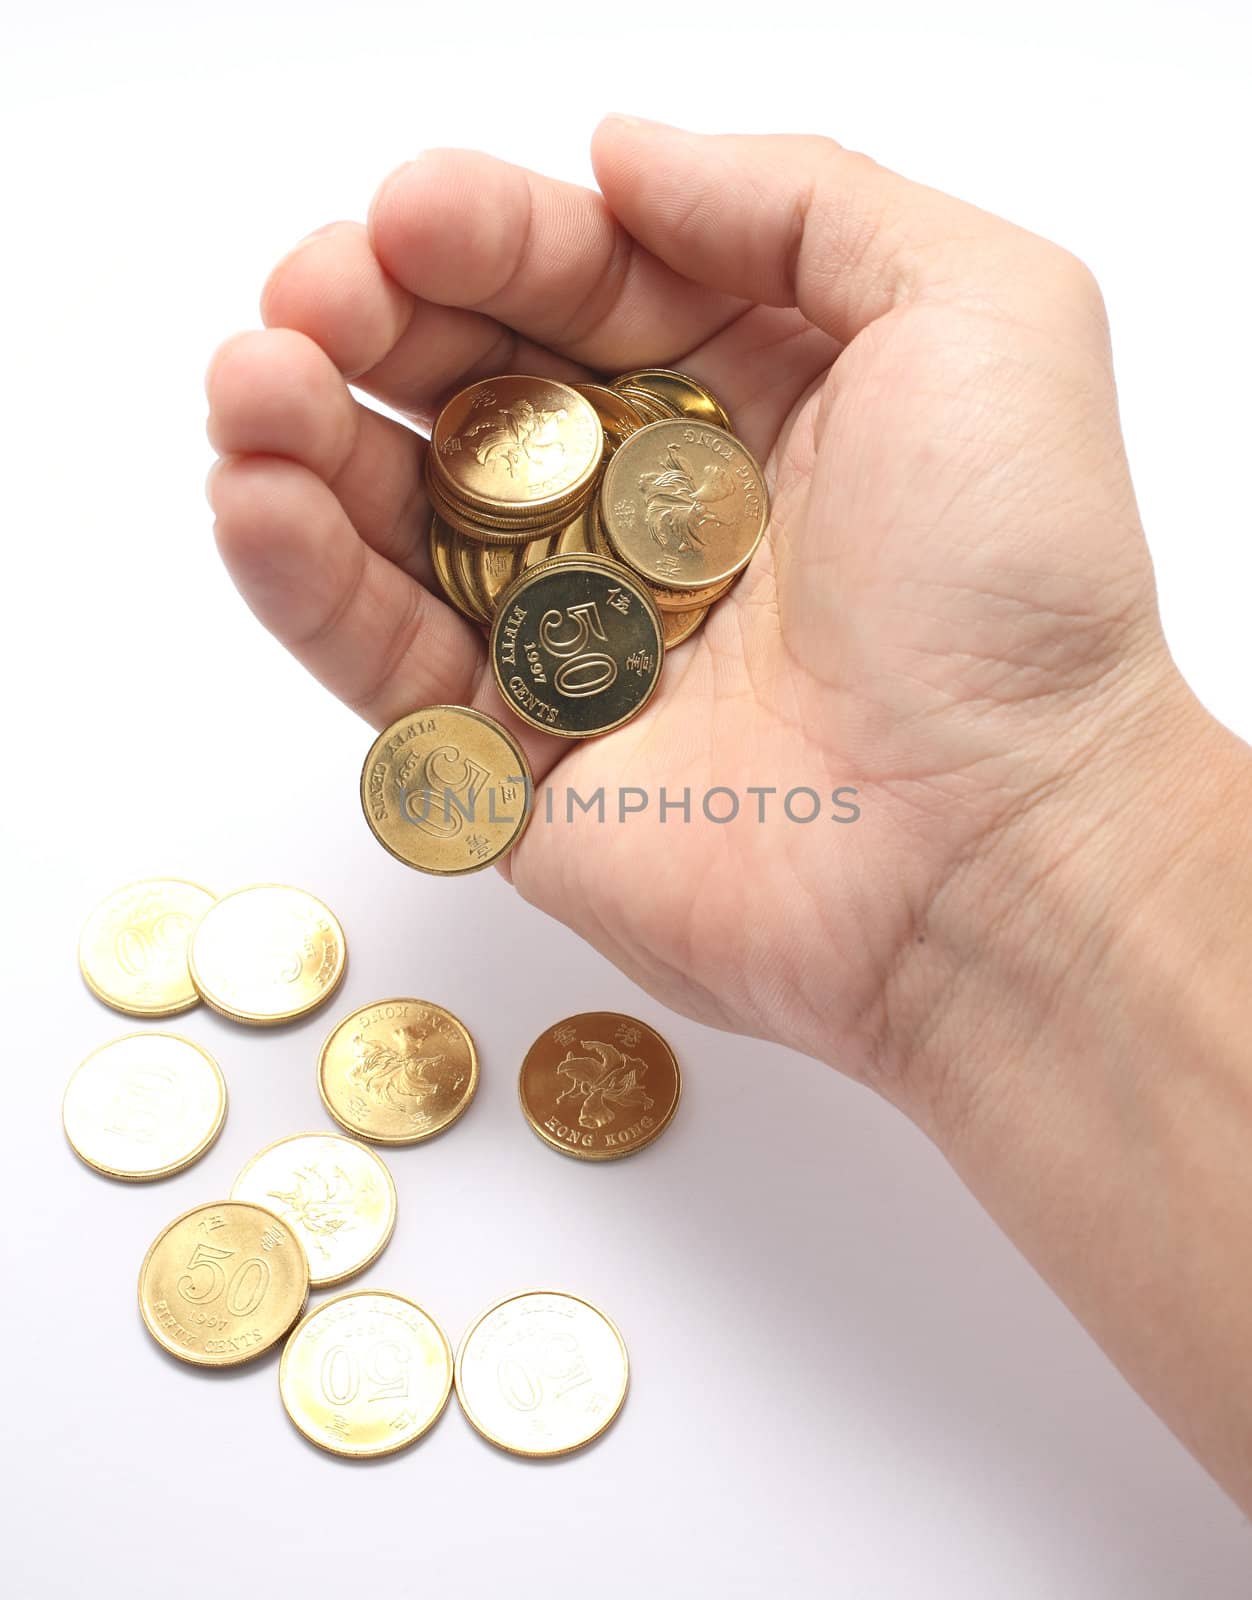 A hand dropping coins